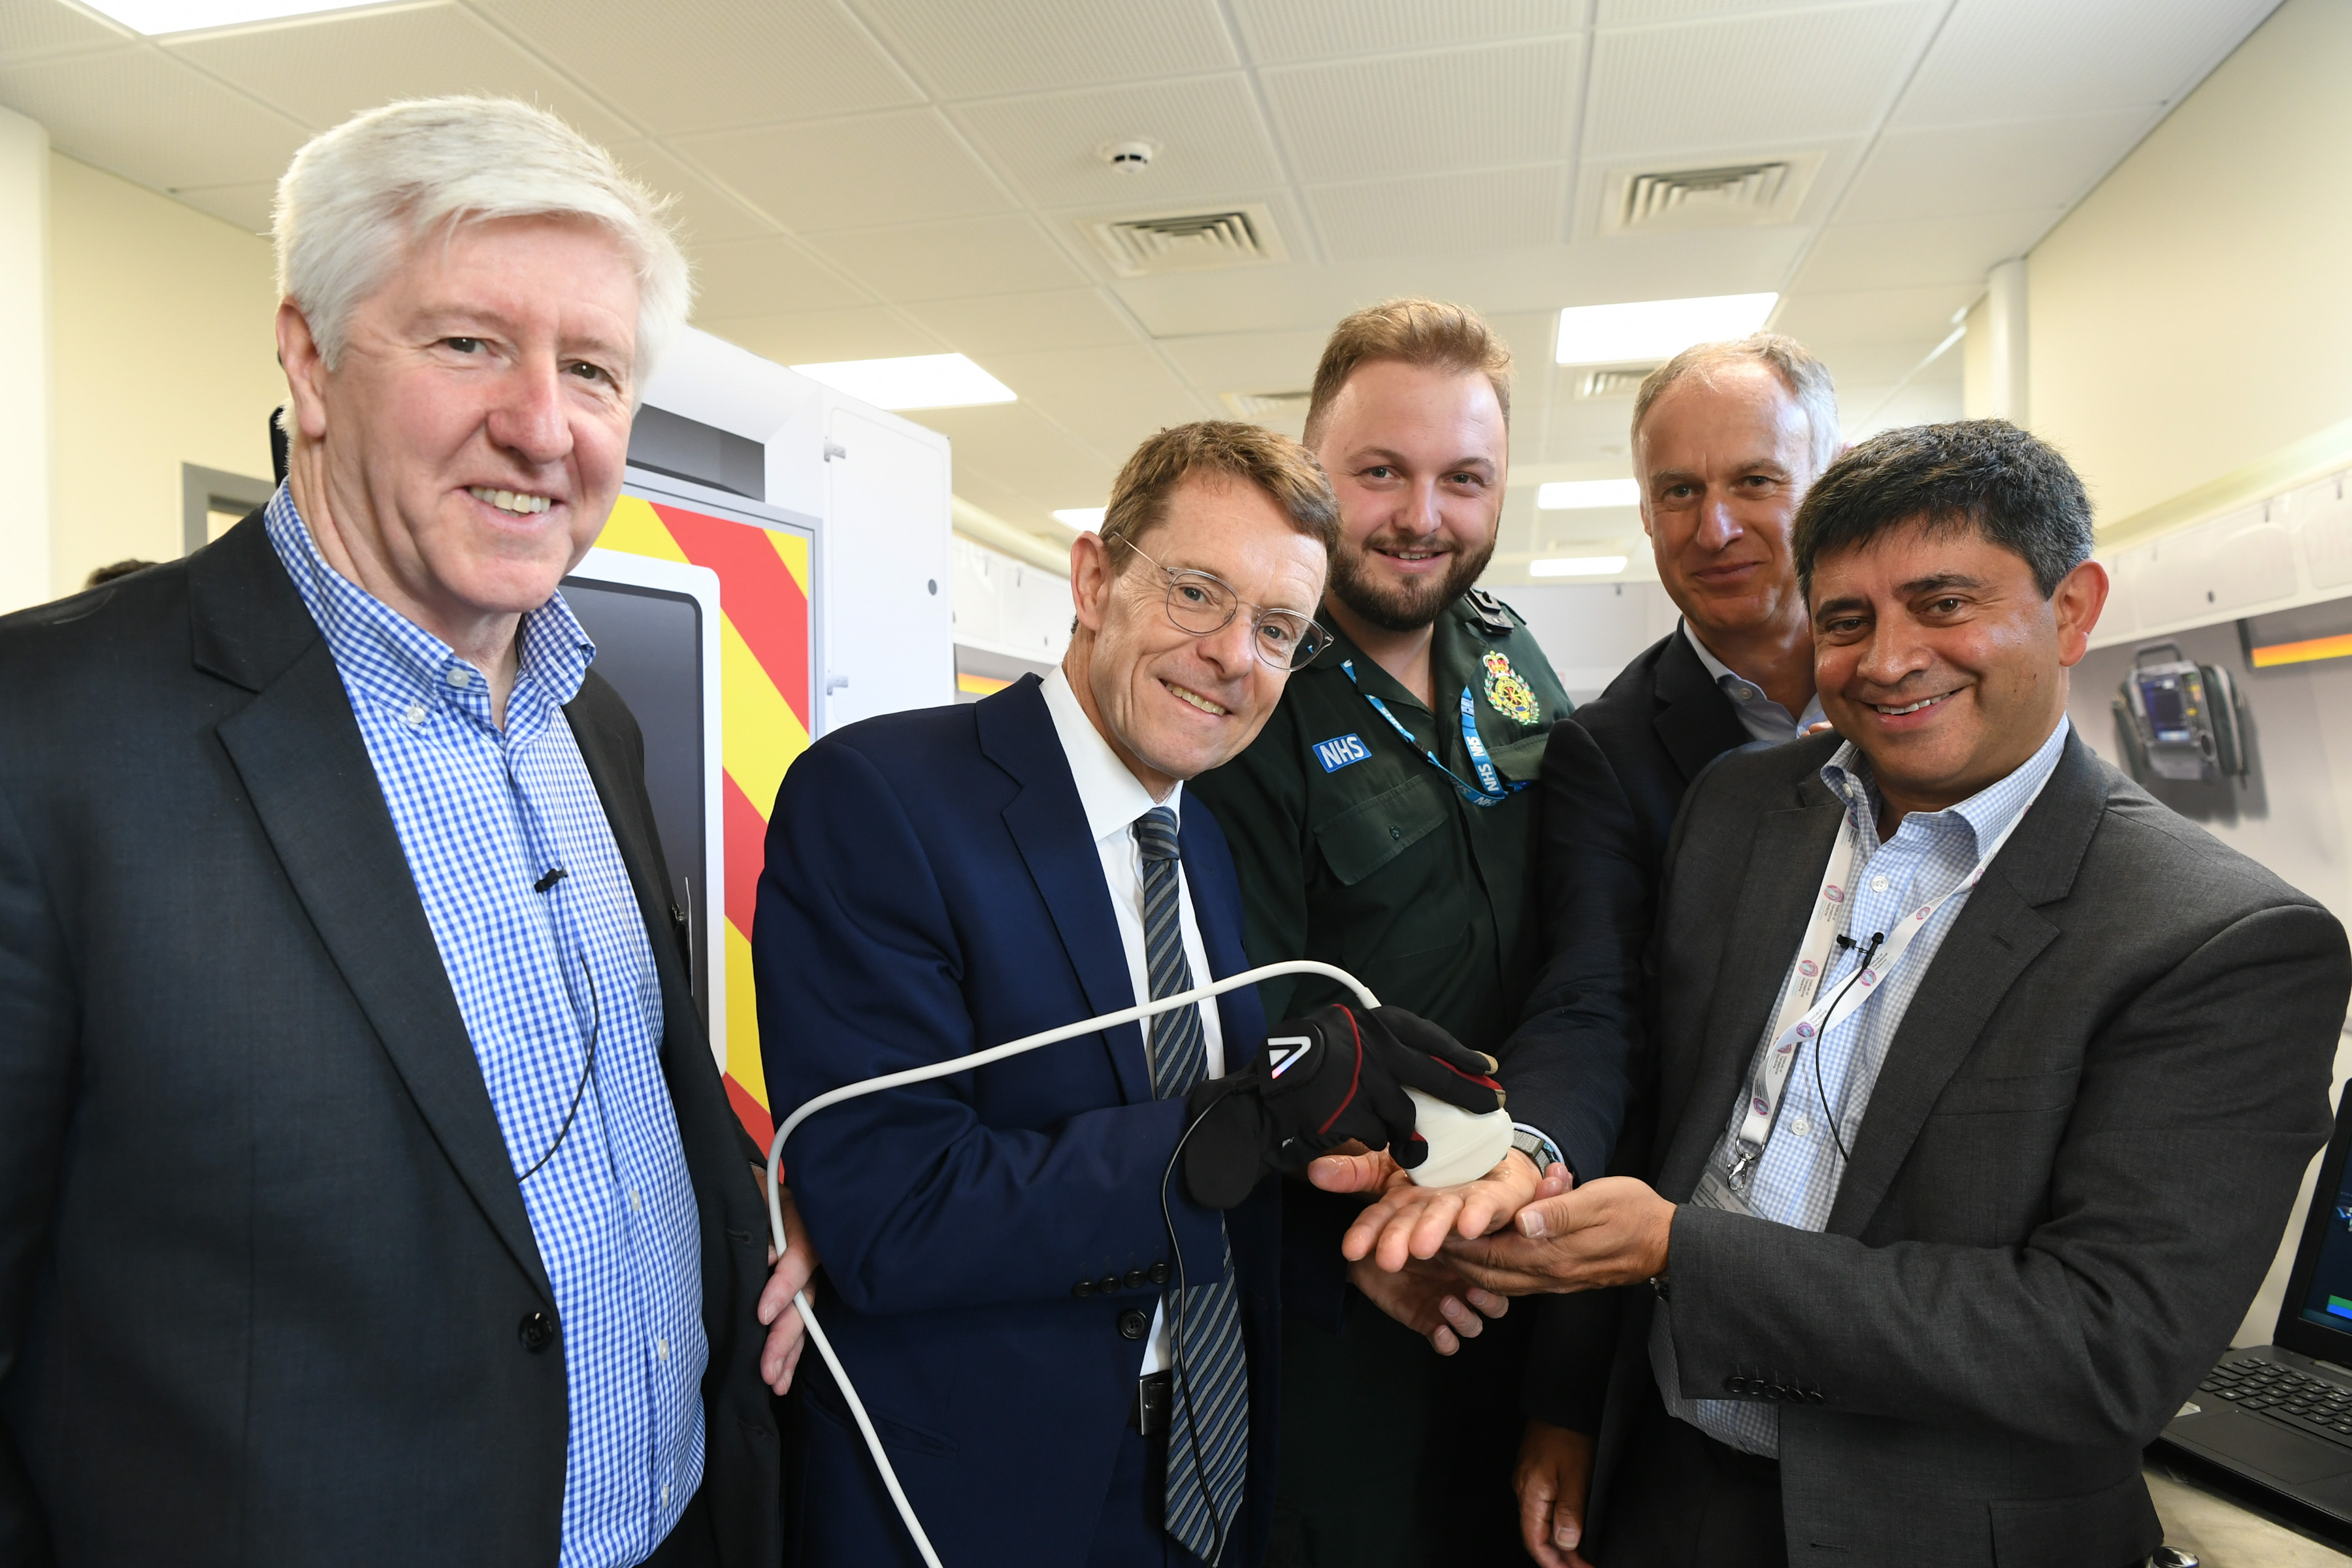 Mayor of the West Midlands, Andy Street (centre) tries out the haptic glove alongside Omkar Chana from WM5G and Fotis Karonis and Jeremy Spencer from BT